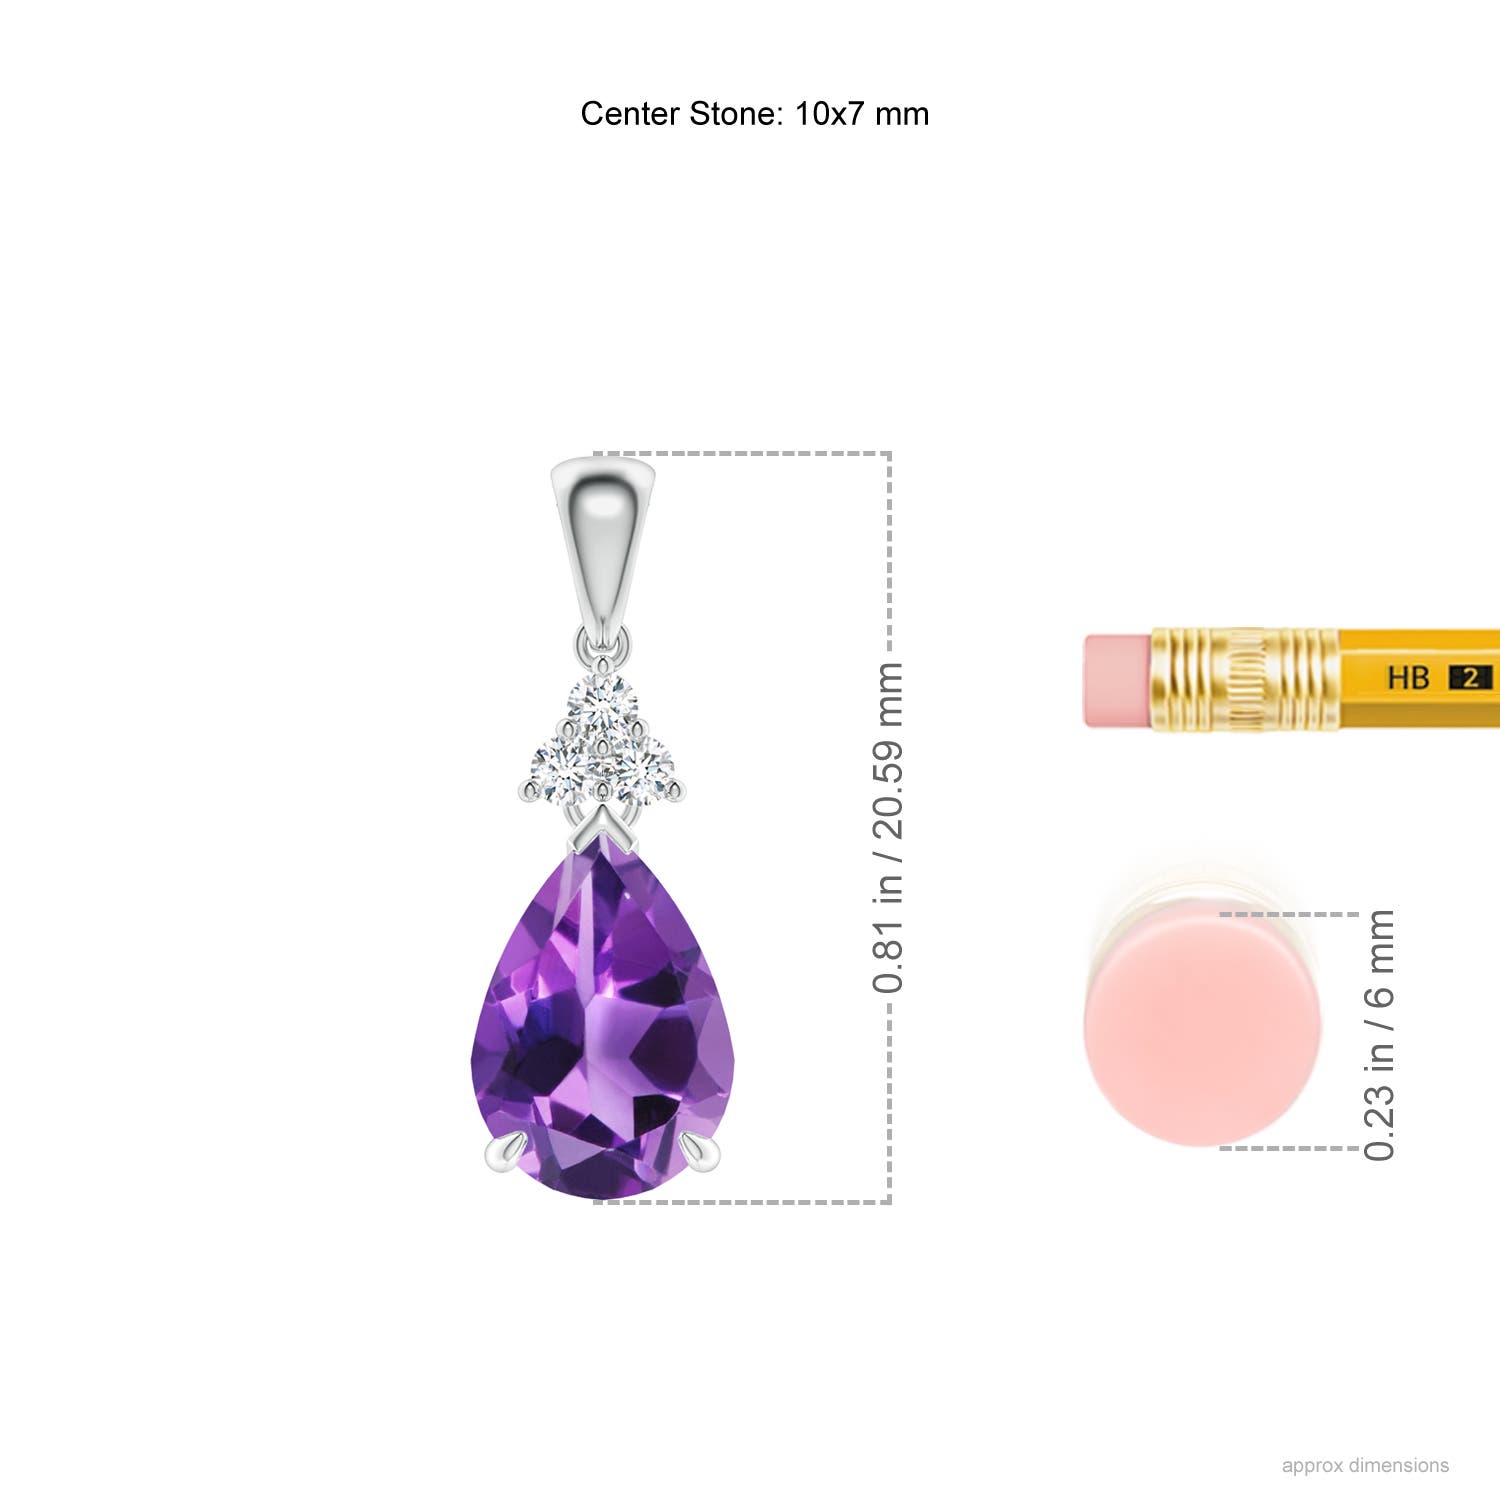 AAA - Amethyst / 1.69 CT / 14 KT White Gold